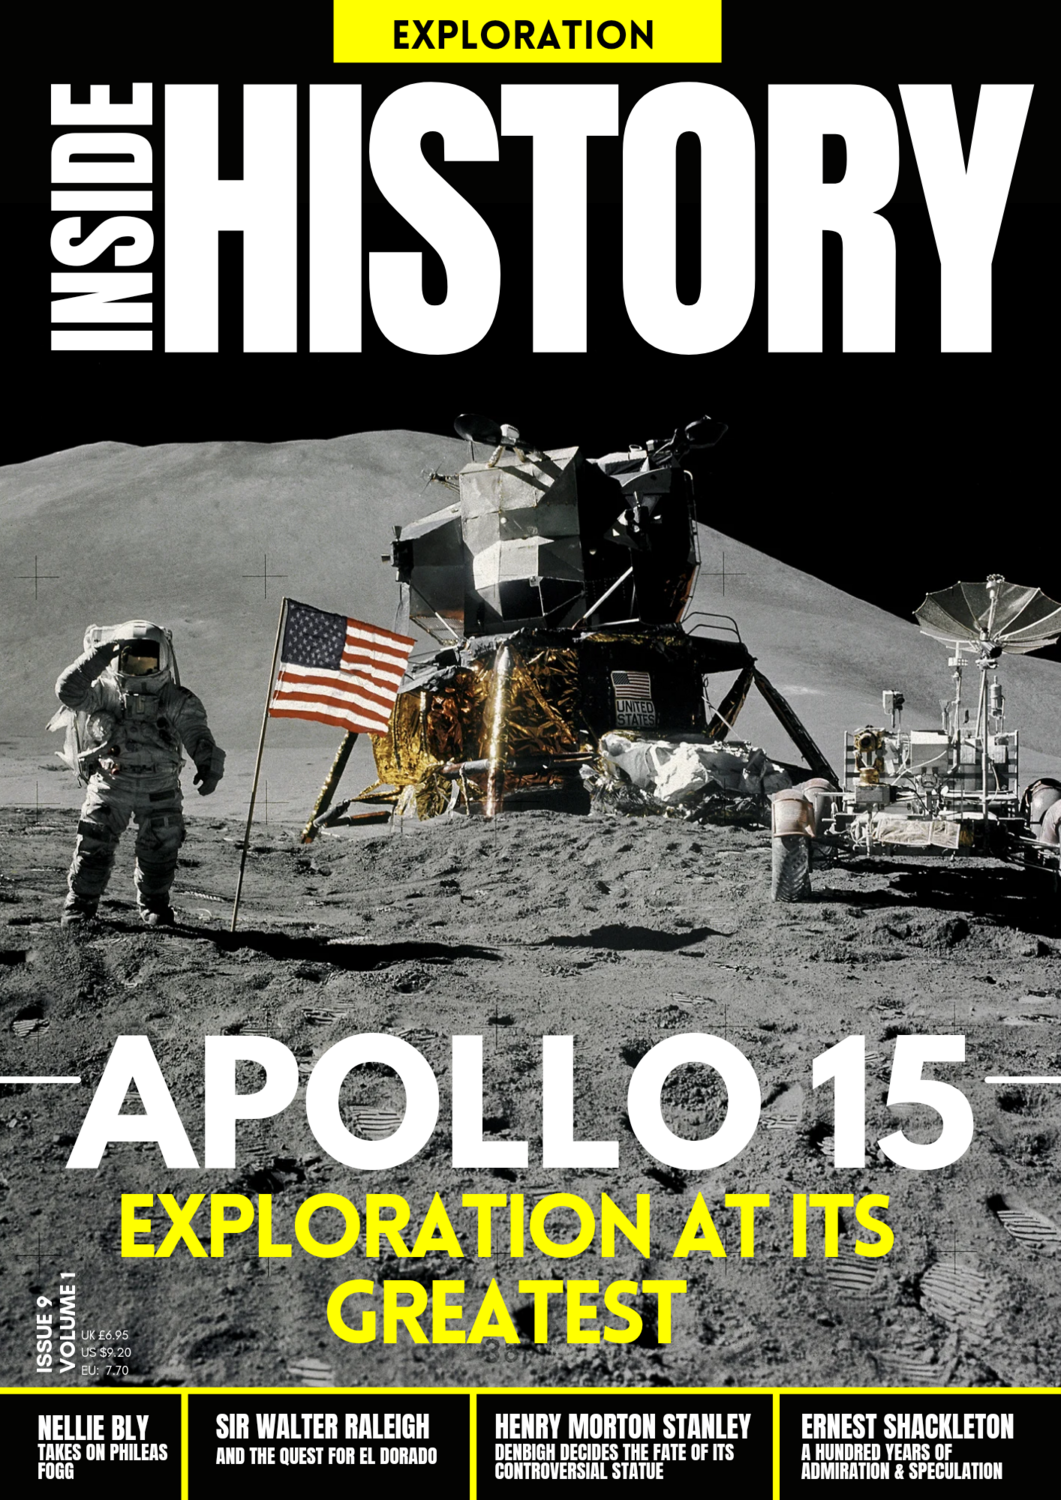 Inside History: Exploration (Worldwide Delivery)